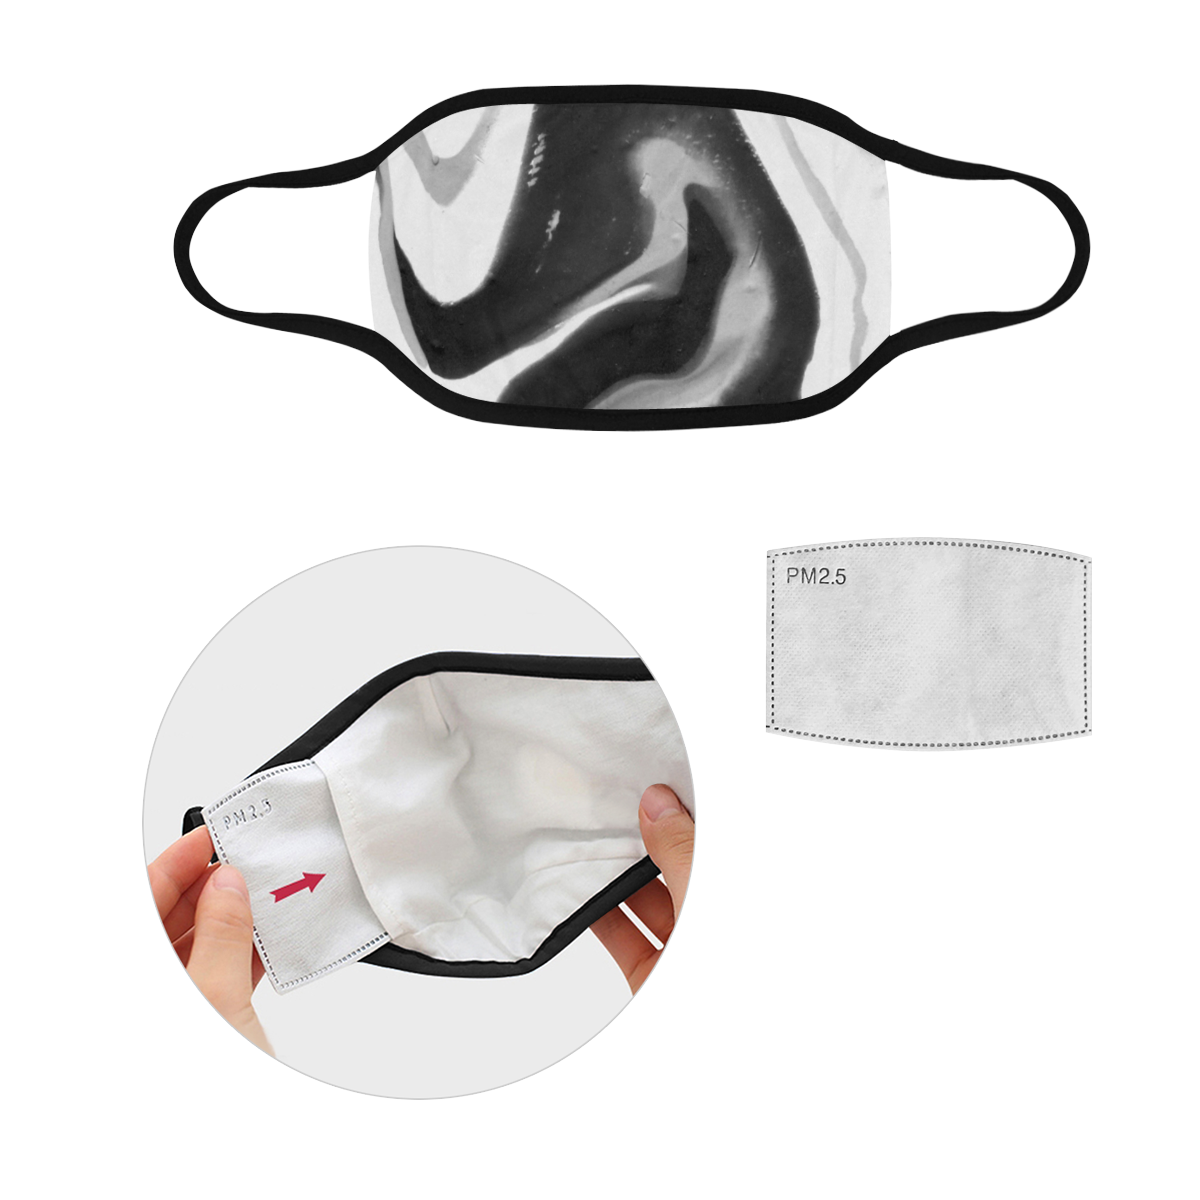 Night Travel Face Mask Mouth Mask (2 Filters Included) (Non-medical Products)